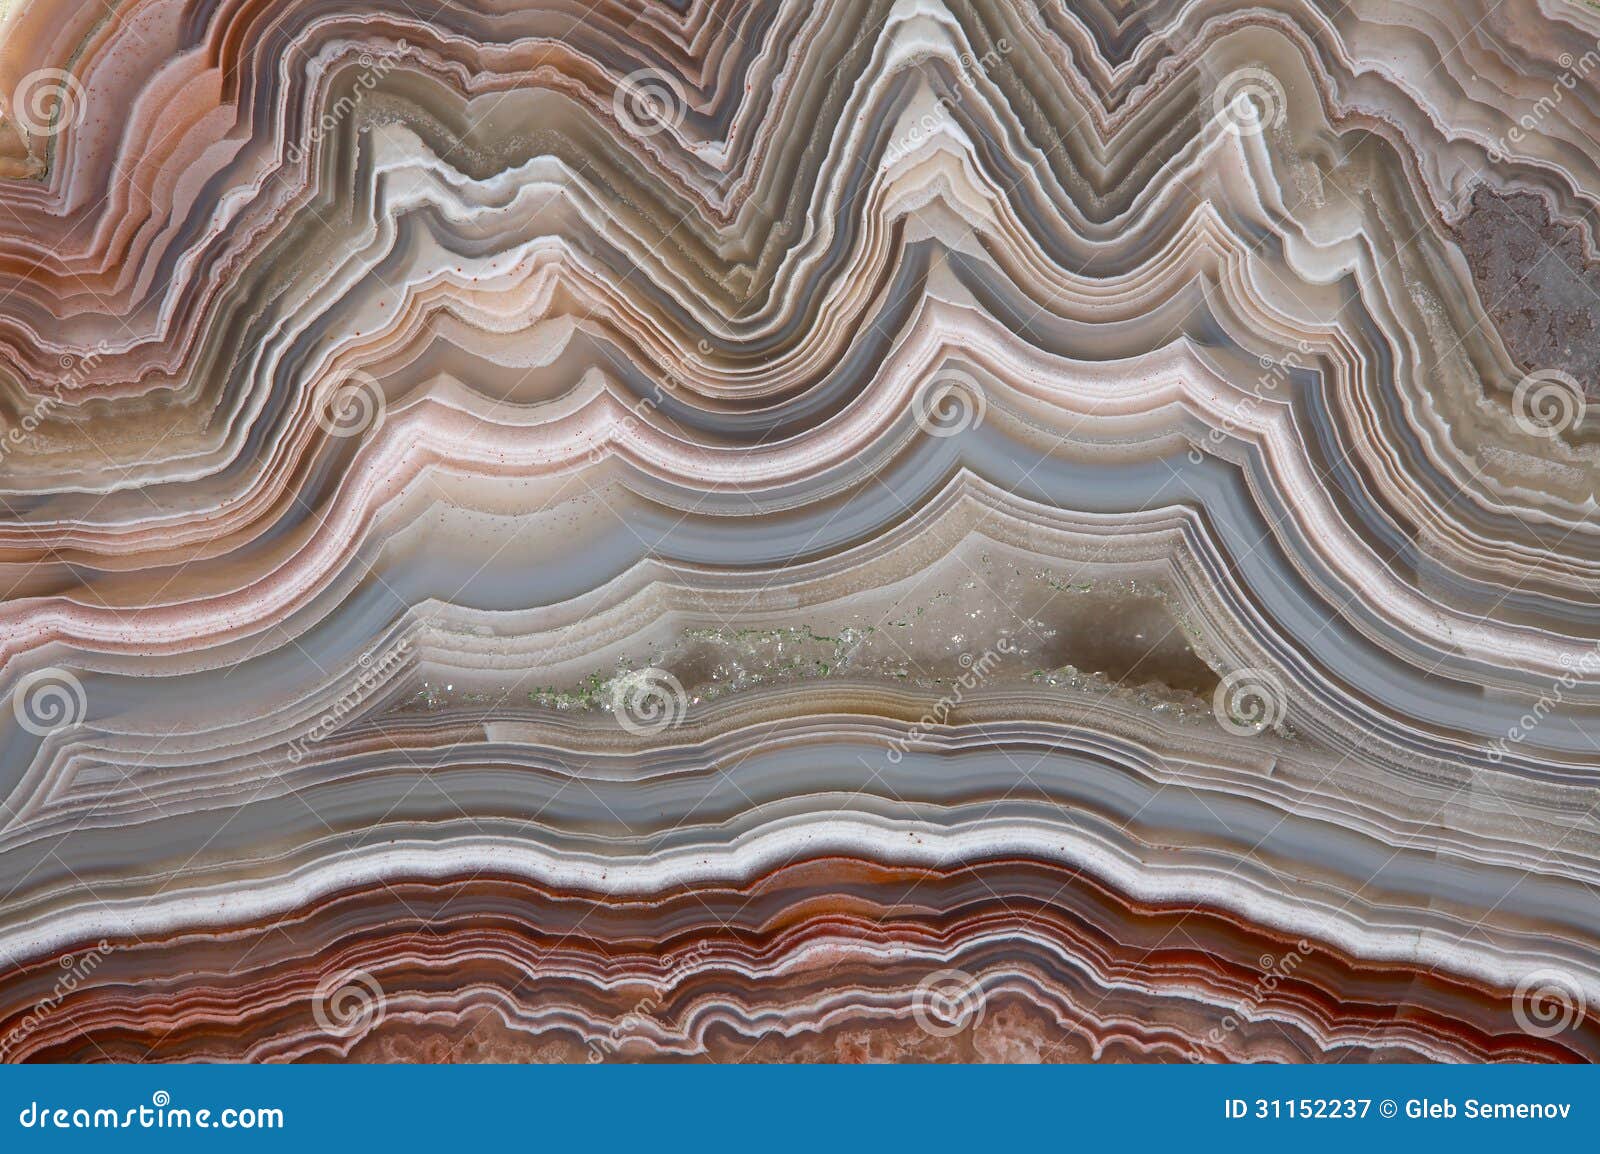 the polished cut of agate